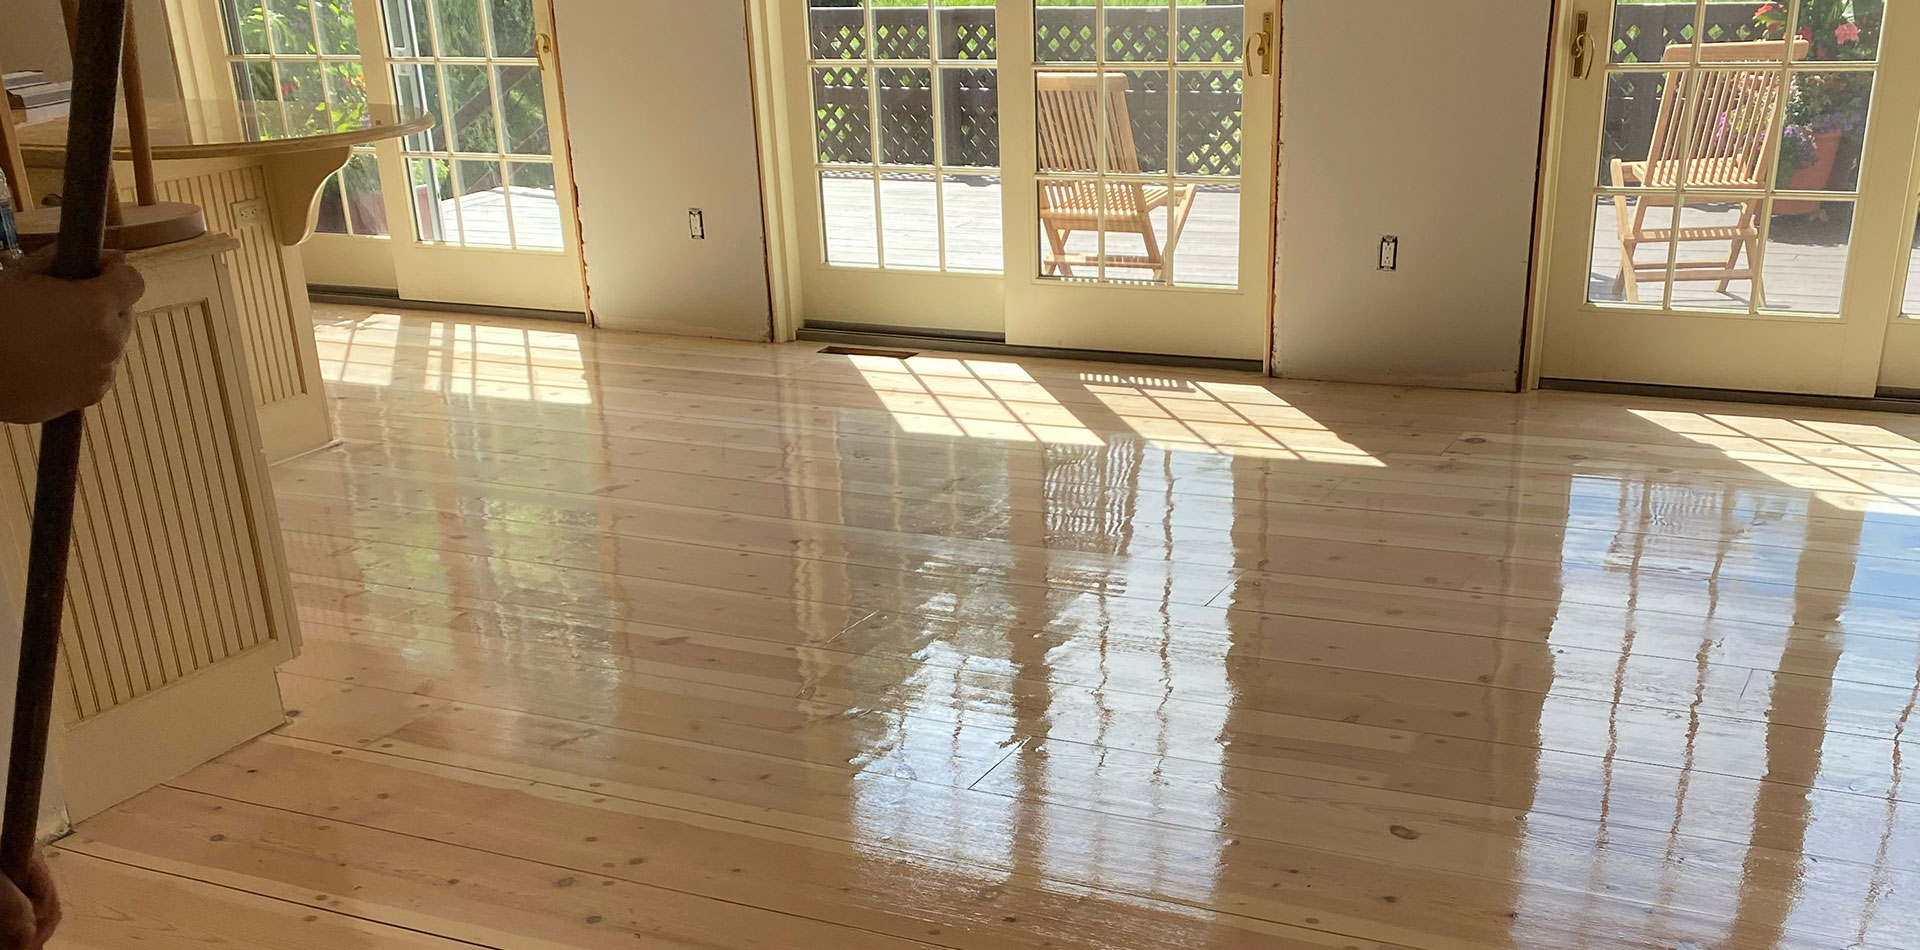 interior of a home with newly installed and waxed hardwood floors